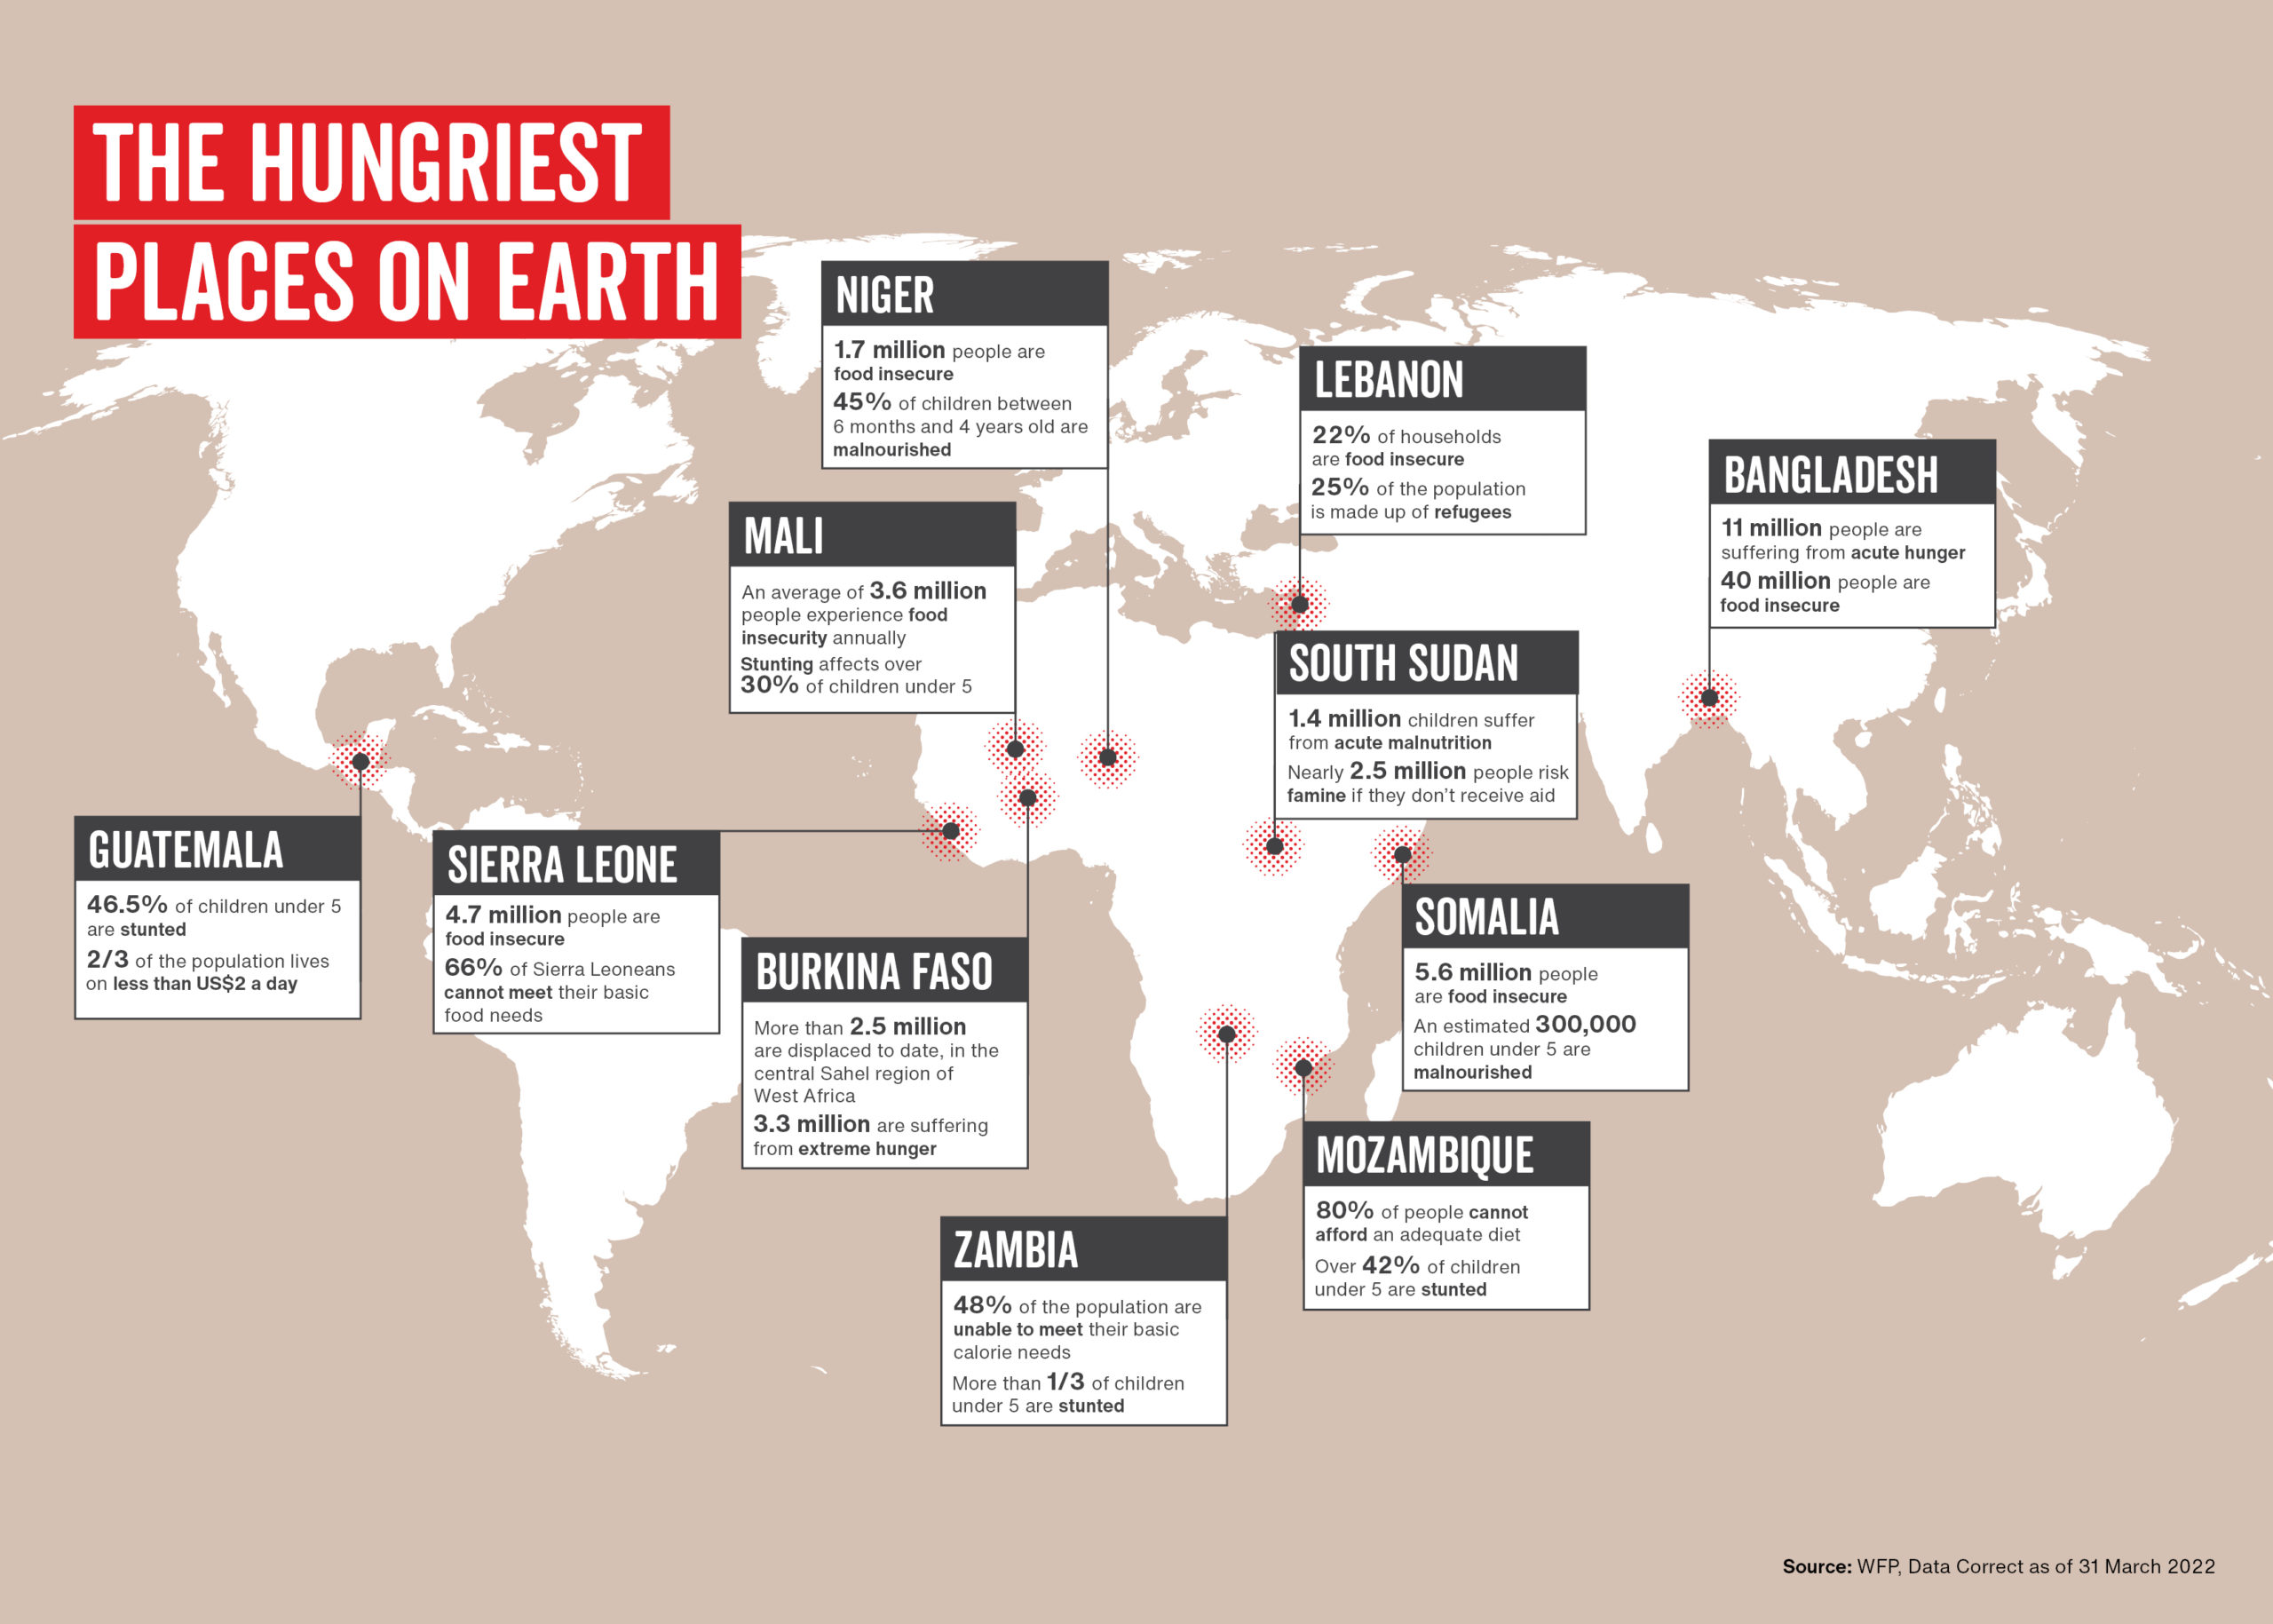 Map showing the hungriest places on Earth as of 31 March 2022. Niger: 1.7 million people are food insecure, 45% of children between 6 months and 4 years old are Malnourished. Lebanon: 25% of the population is made up of refugees, 22% of households are food insecure. 
Bangladesh: 11 million people are suffering from acute hunger, 40 million people are food insecure. Mali:
An average of 3.6 million people experience food insecurity annually, Stunting affects over 30% of children under 5.
South Sudan: 1.4 million children suffer from acute malnutrition, Nearly 2.5 million people risk famine if they don’t receive aid. Guatemala: 46.5% of children under 5 are stunted, 2/3 of the population lives on less than US$2 a day. Sierra Leone: 4.7 million people are food insecure, 
66% of Sierra Leoneans cannot meet their basic food needs. Burkina Faso: More than 2.5 million are displaced to date, in the central Sahel region of West Africa, 3.3 million are suffering from extreme hunger. Somalia: 5.6 million people are food insecure, An estimated 300,000 children under 5 are malnourished. Mozambique: Over 42% of children under 5 are stunted, 80% of people cannot afford an adequate diet. Zambia: More than 1/3 of children under 5 are stunted, 48% of the population are unable to meet their basic calorie needs.